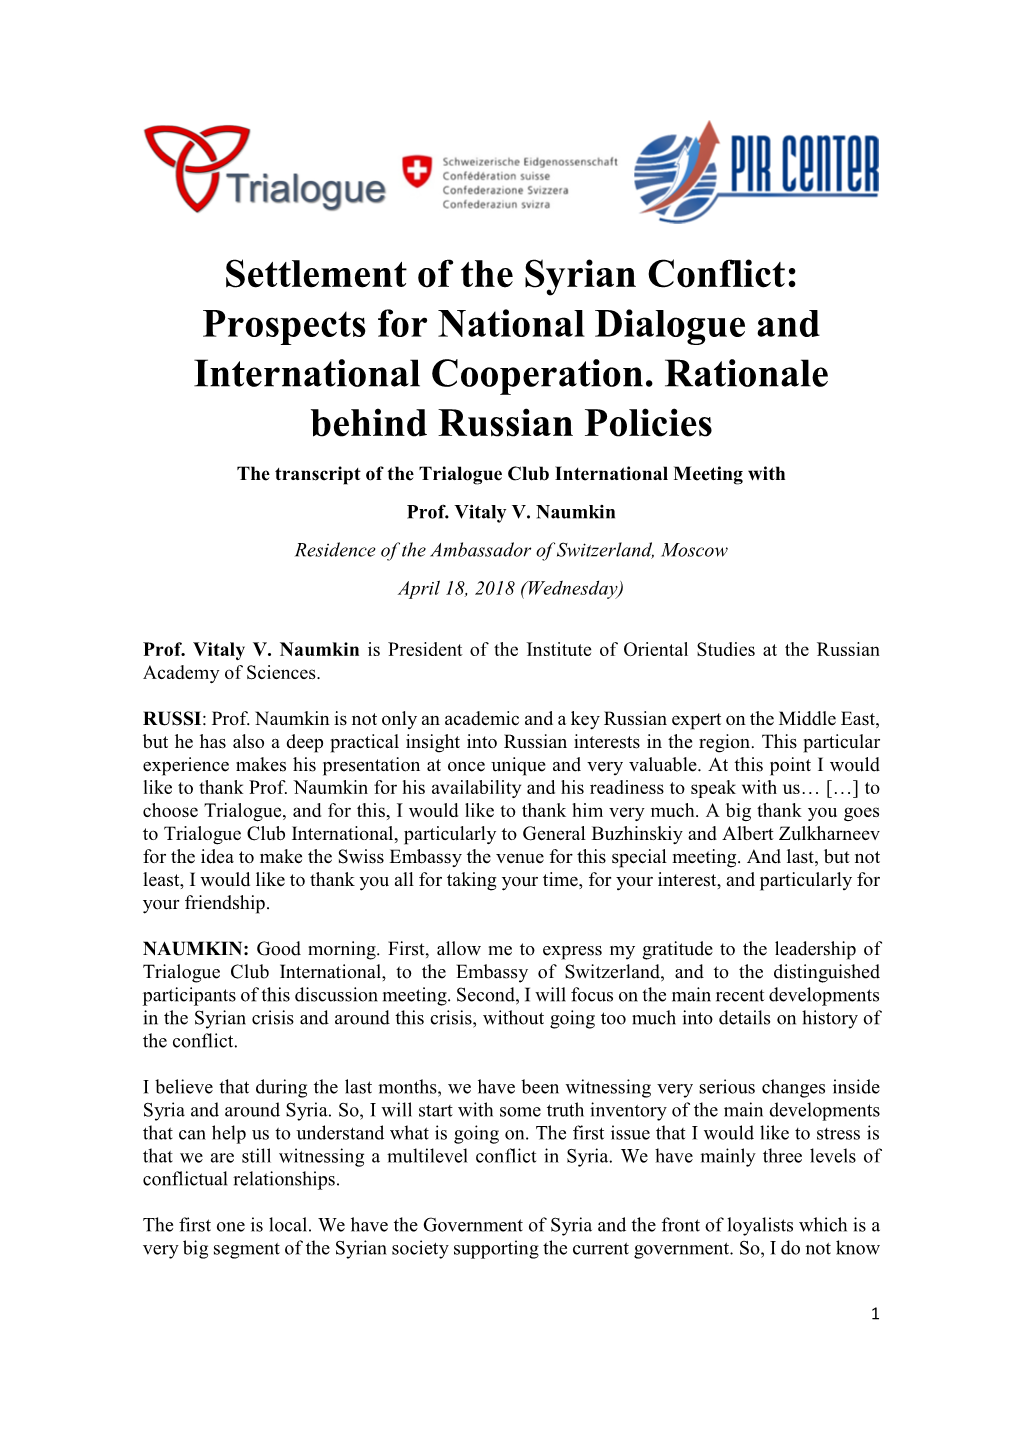 Settlement of the Syrian Conflict: Prospects for National Dialogue and International Cooperation